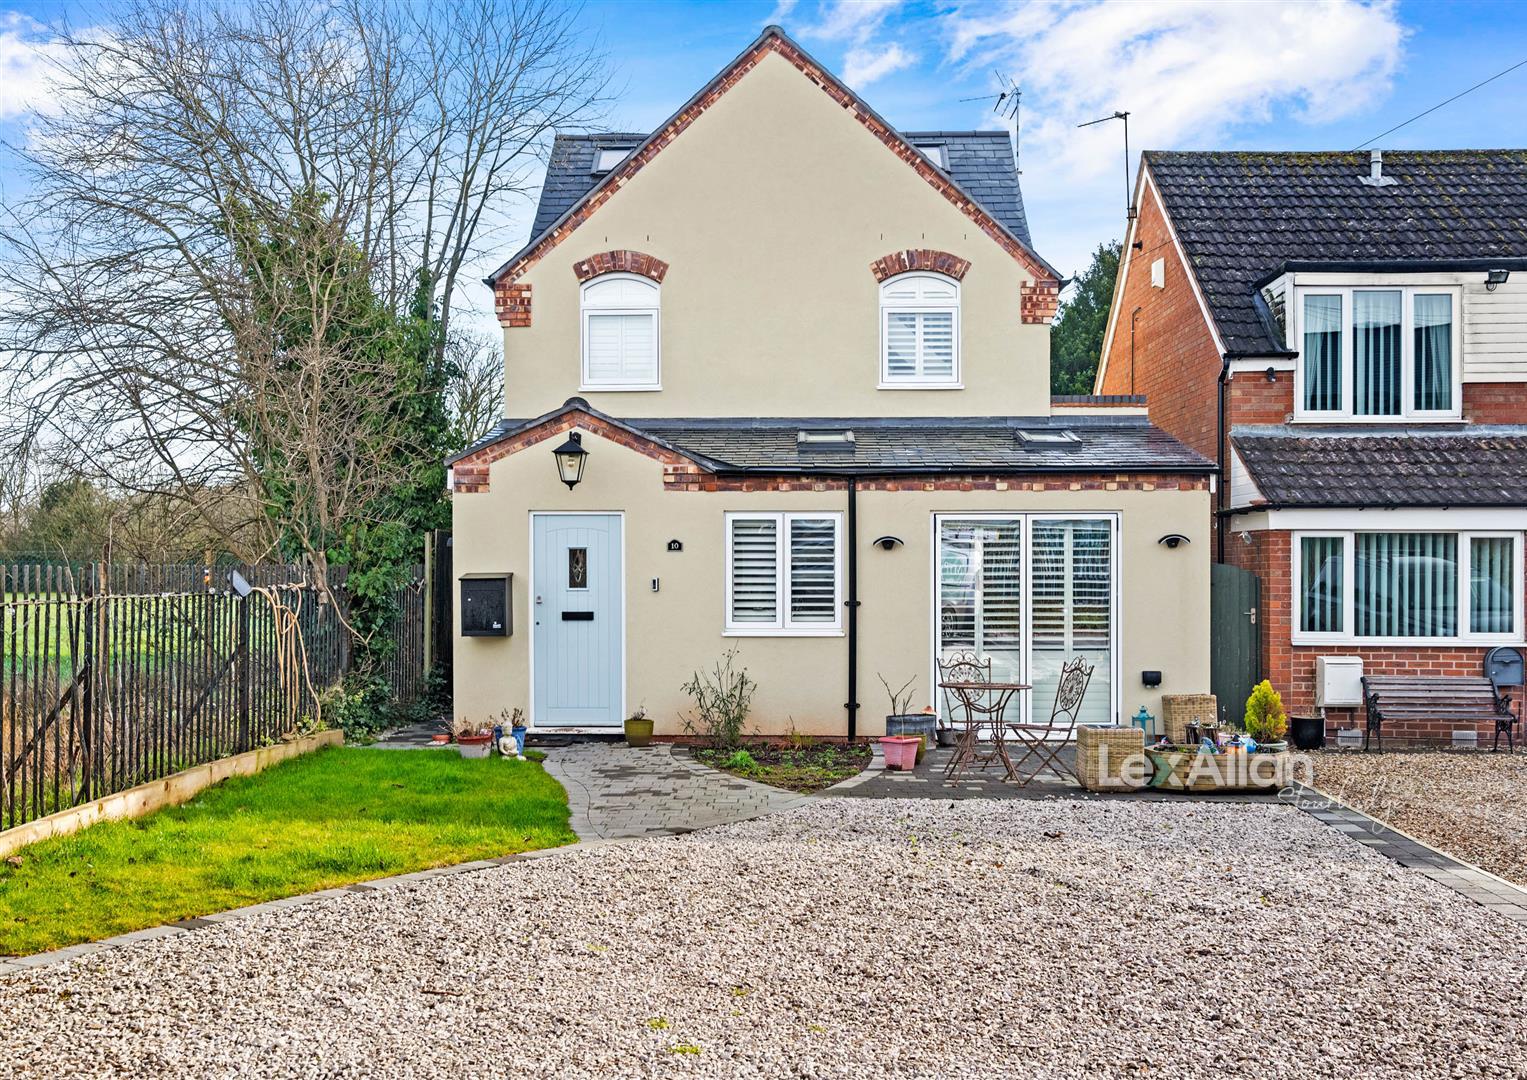 4 bed detached house for sale in Castle Street, Stourbridge - Property Image 1